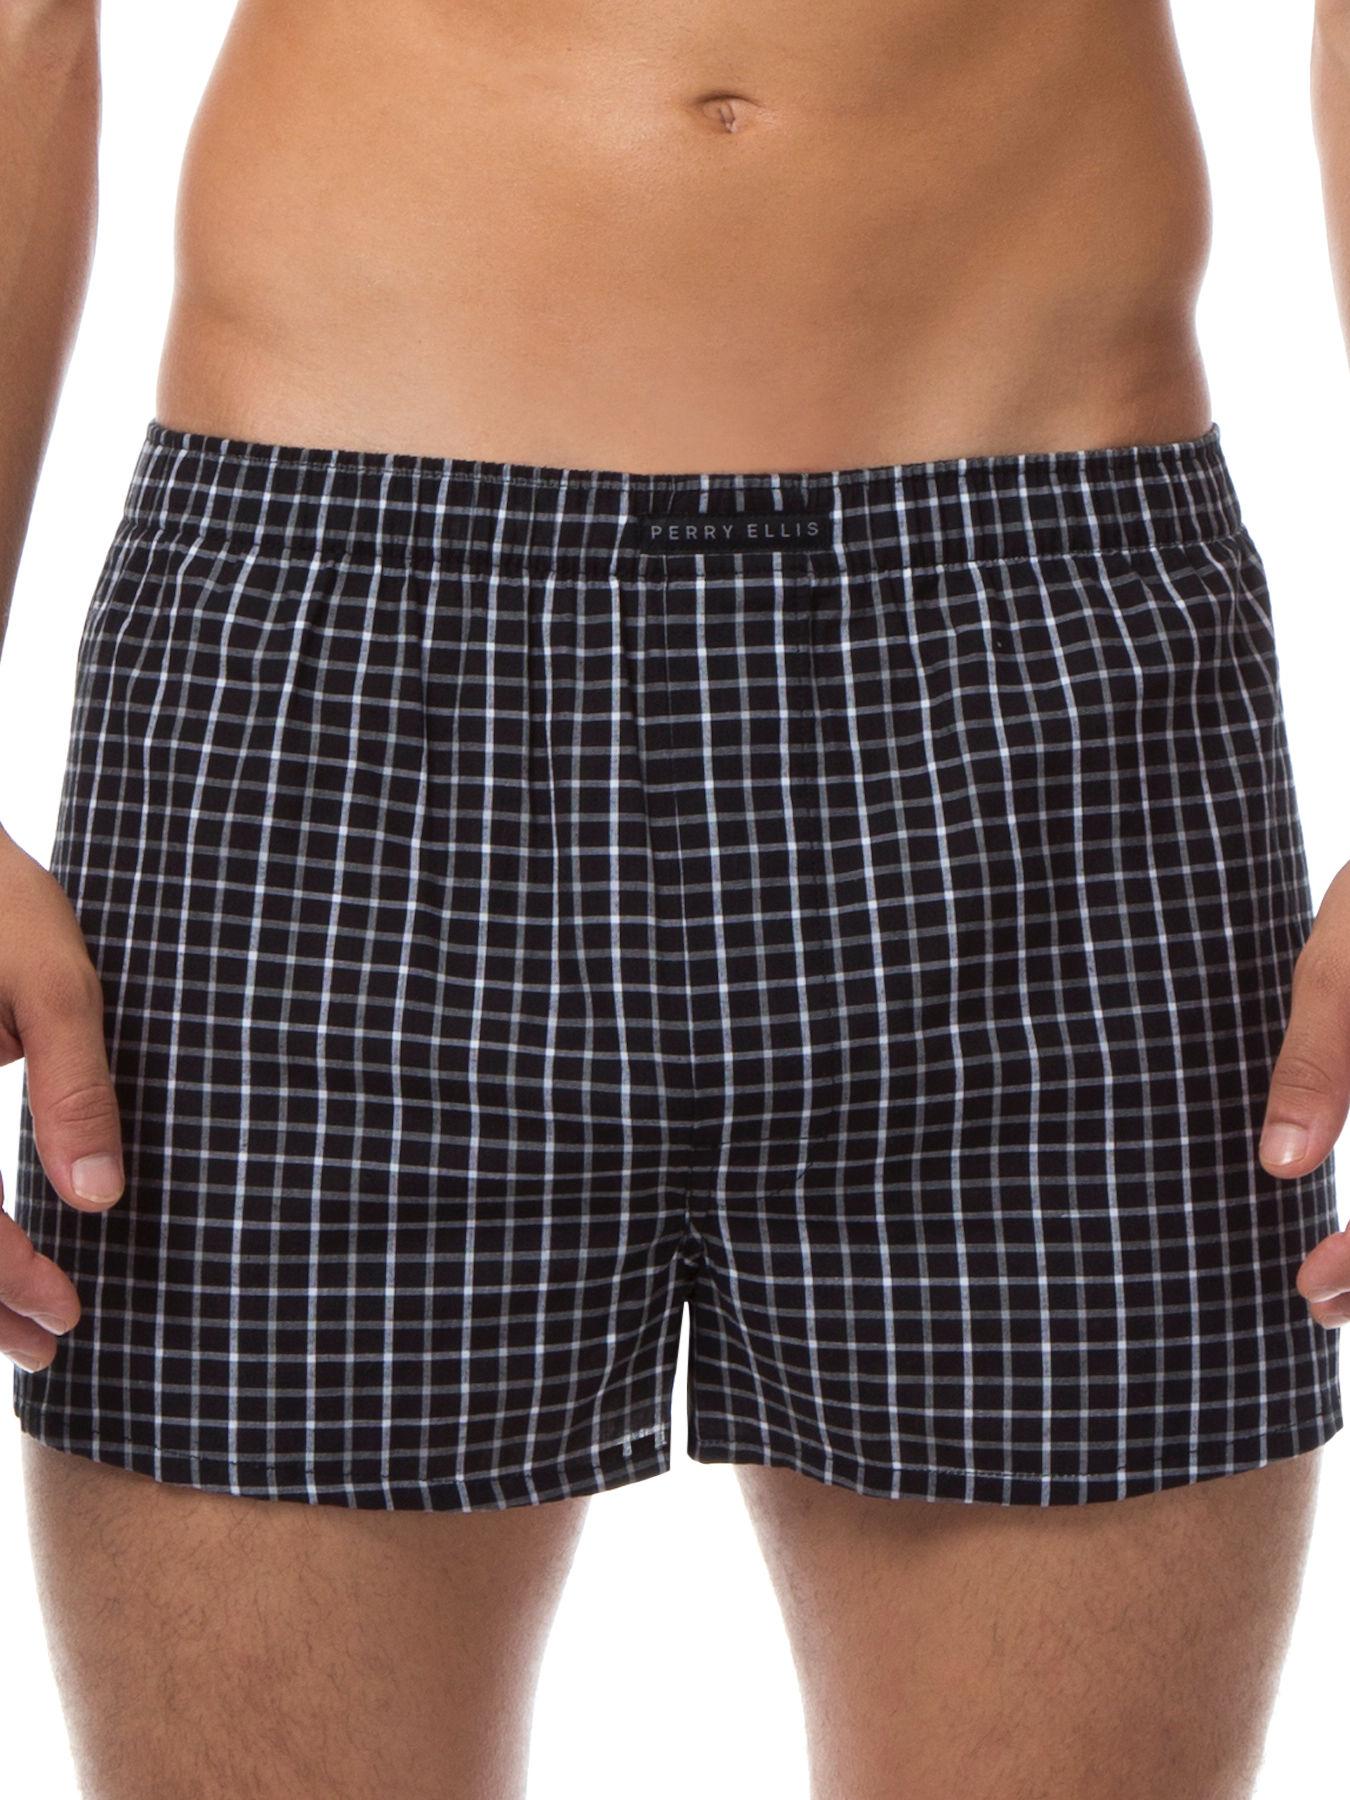 Perry Ellis Cotton 3 Pack Plaid Woven Boxers in Black for Men - Lyst